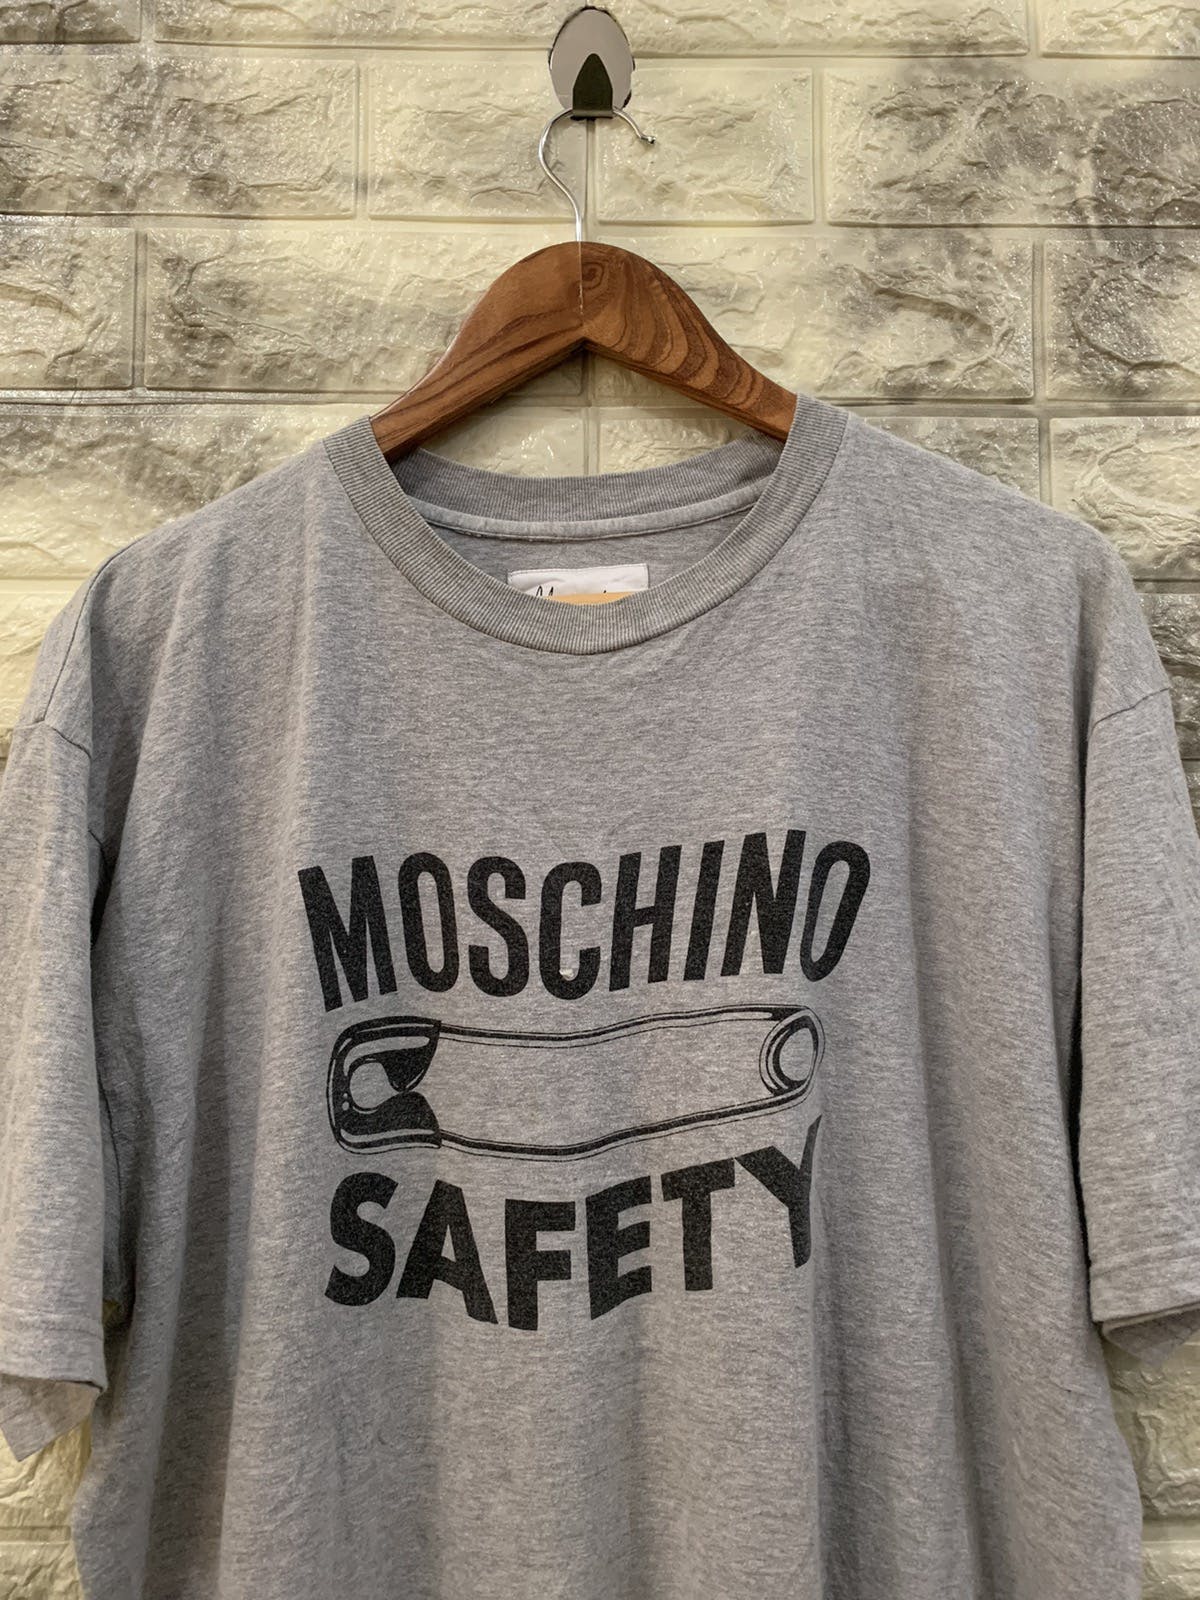 Moschino Safety graphic tee - 5